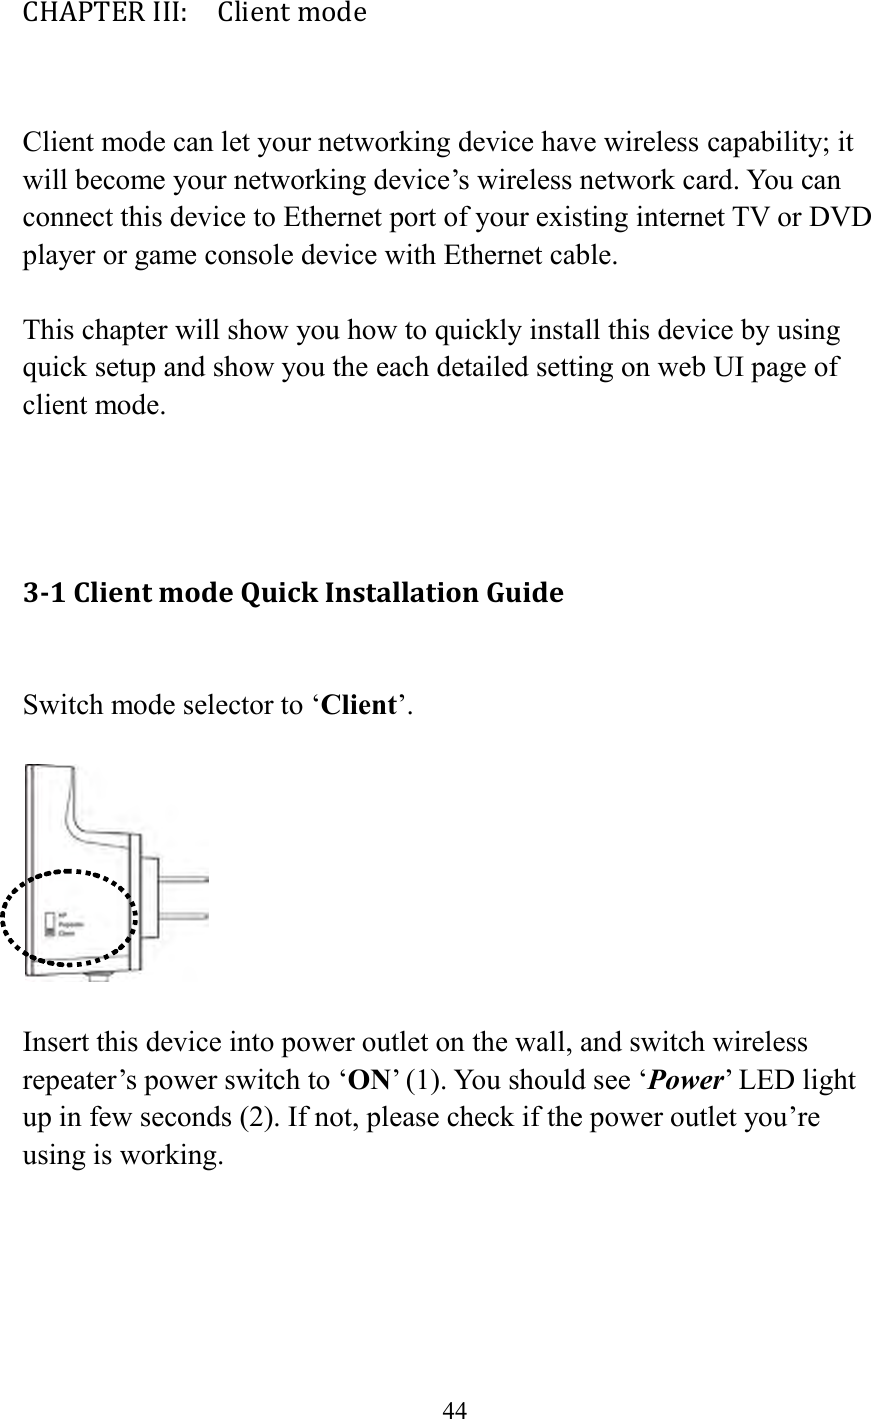  44  CHAPTER III:    Client mode  Client mode can let your networking device have wireless capability; it will become your networking device’s wireless network card. You can connect this device to Ethernet port of your existing internet TV or DVD player or game console device with Ethernet cable.  This chapter will show you how to quickly install this device by using quick setup and show you the each detailed setting on web UI page of client mode.    3-1 Client mode Quick Installation Guide  Switch mode selector to ‘Client’.    Insert this device into power outlet on the wall, and switch wireless repeater’s power switch to ‘ON’ (1). You should see ‘Power’ LED light up in few seconds (2). If not, please check if the power outlet you’re using is working.  